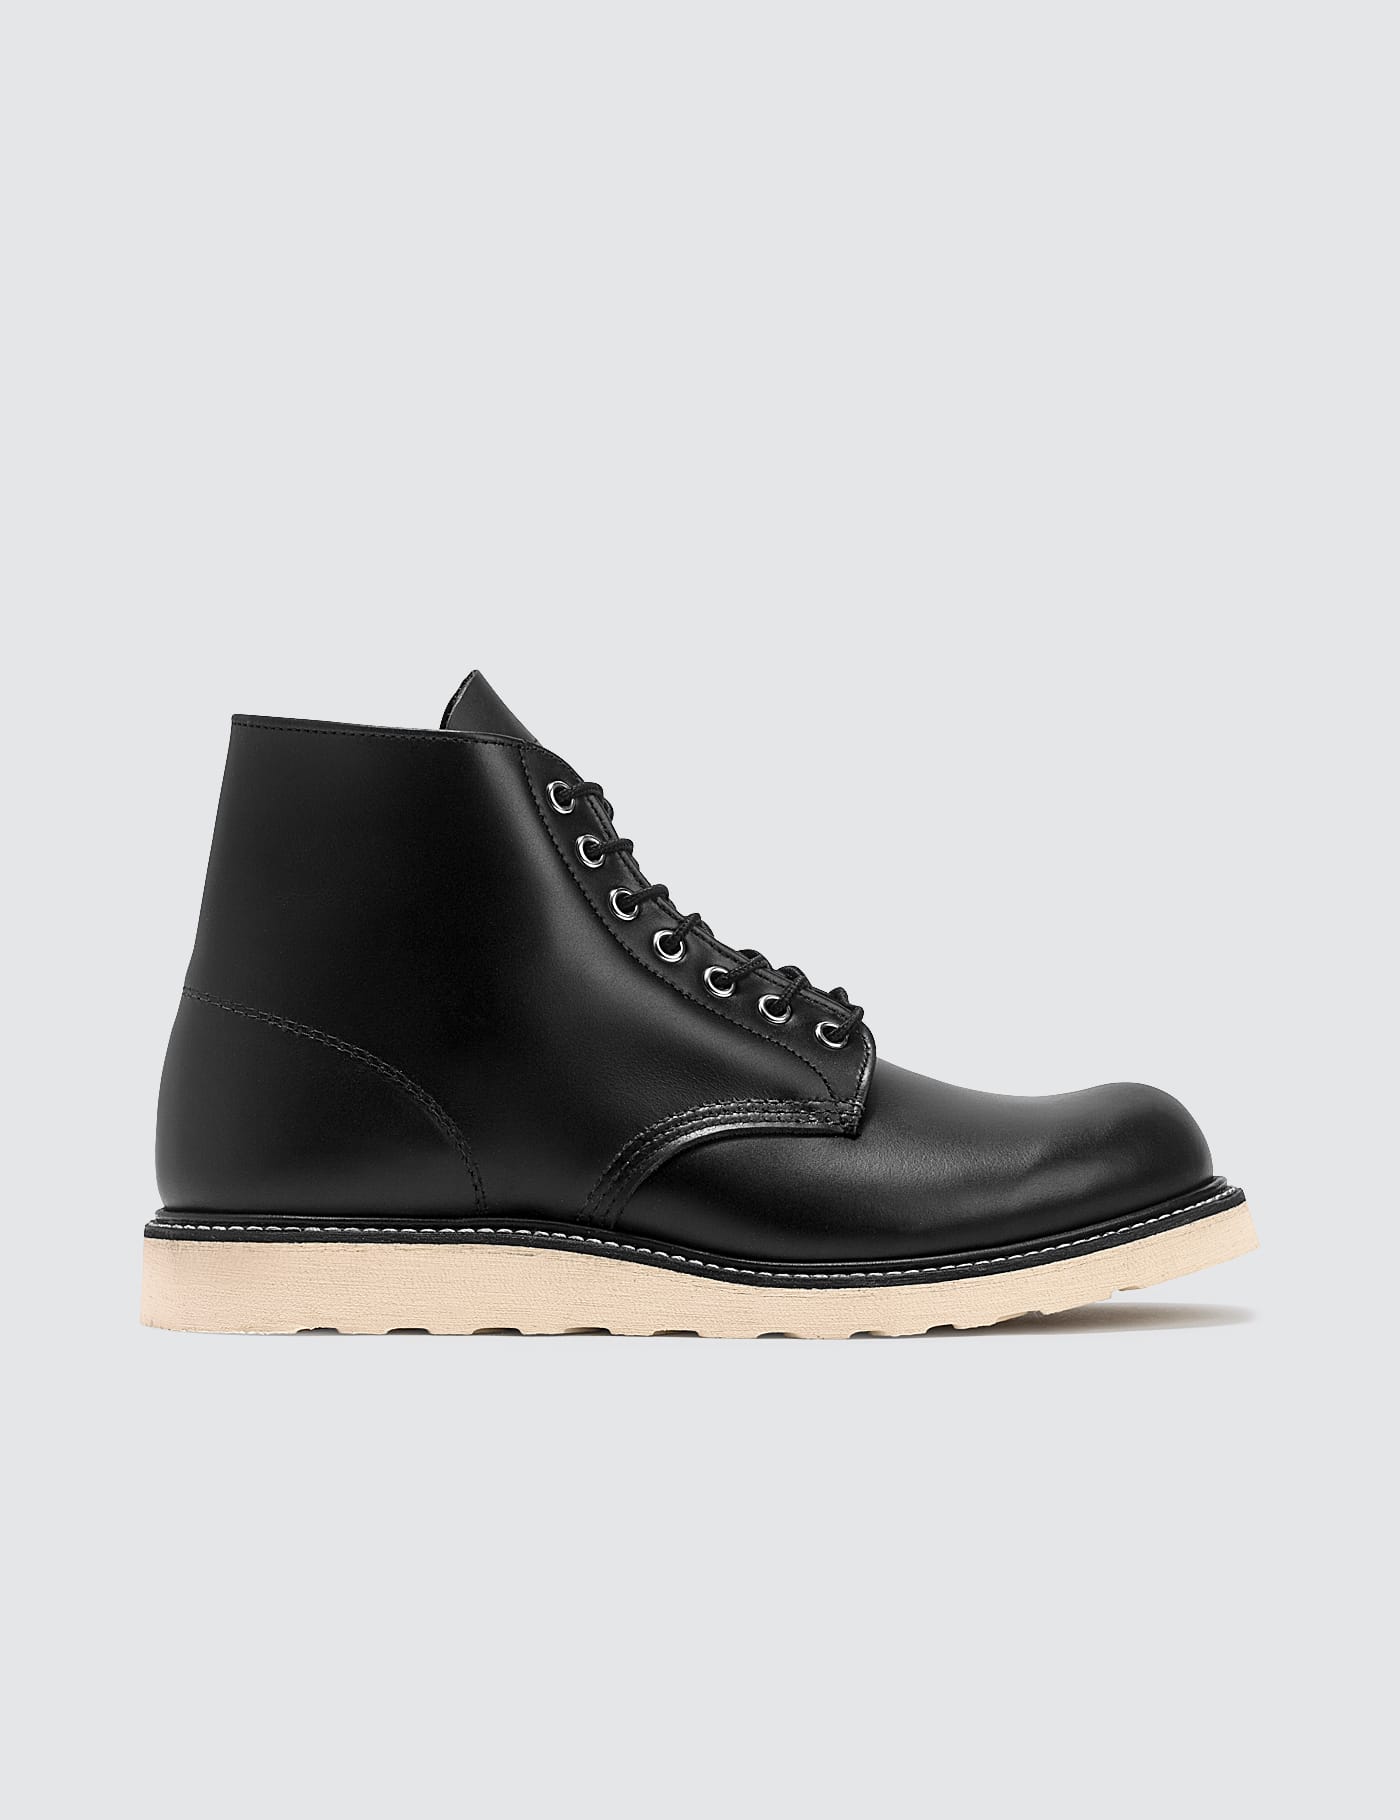 Red Wing - fragment design x Red Wing 6